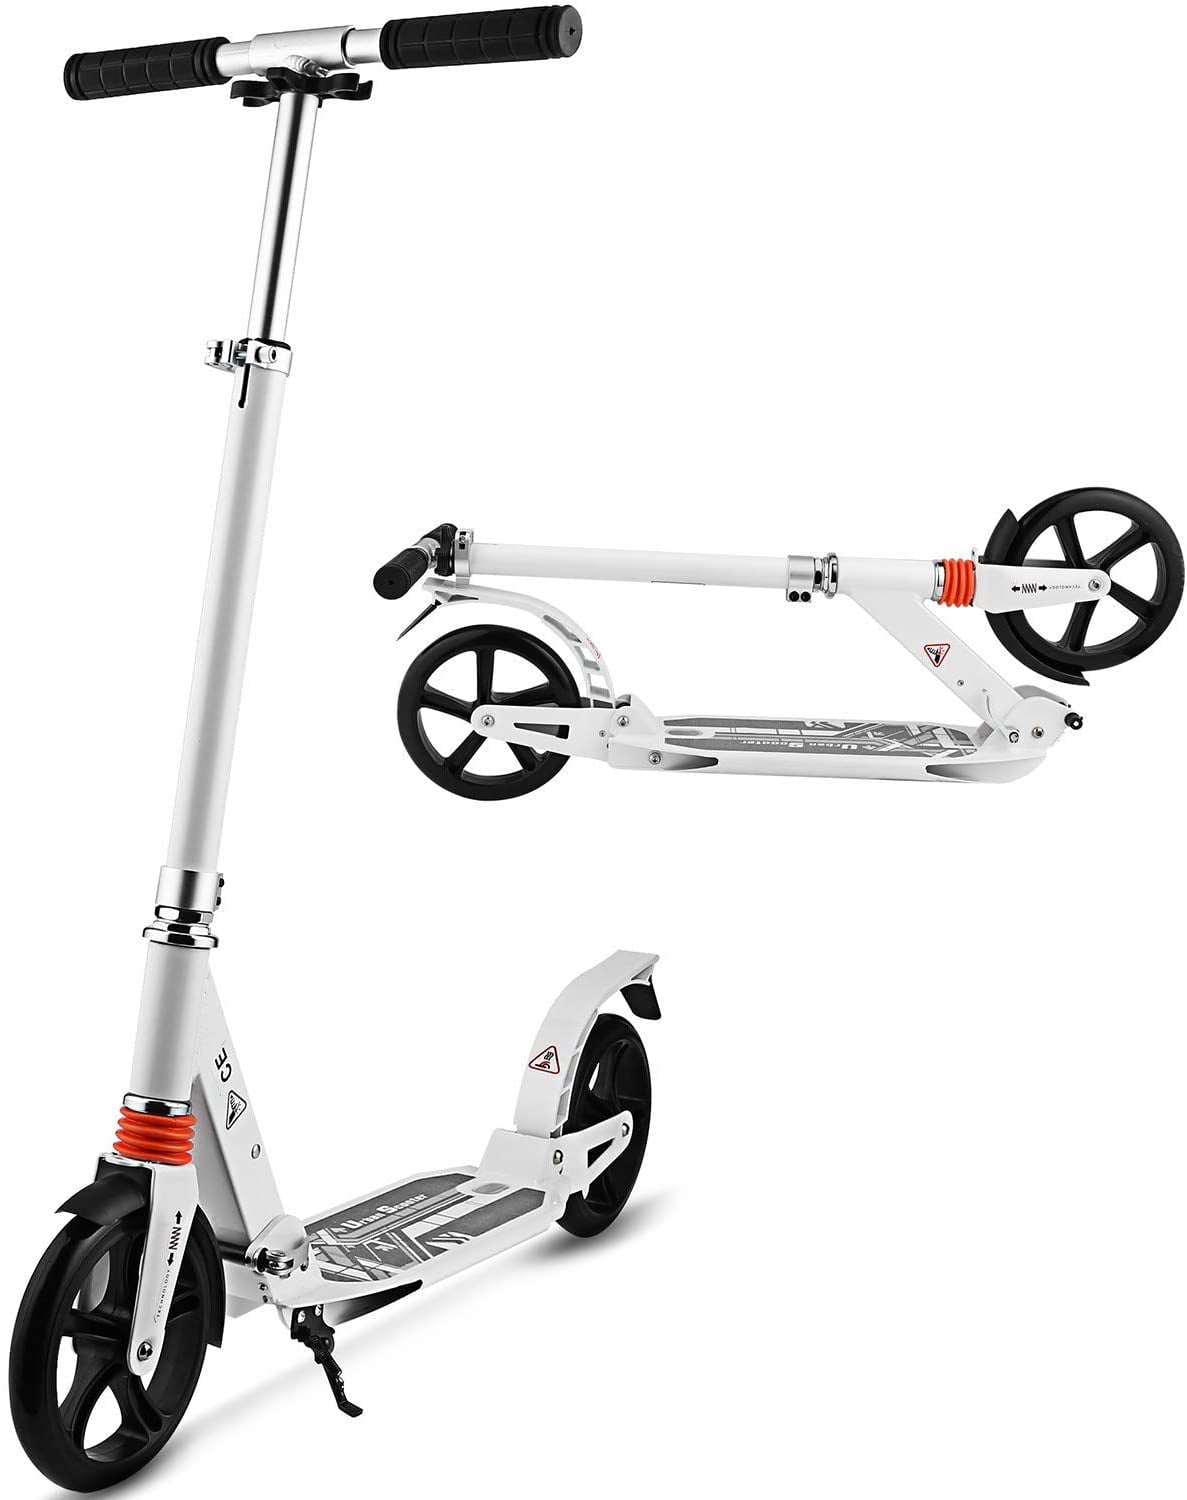 Details about   Caroma Scooter for Adults/Teens Big Wheels Scooter Folding Kick Scooter w/ c 23 